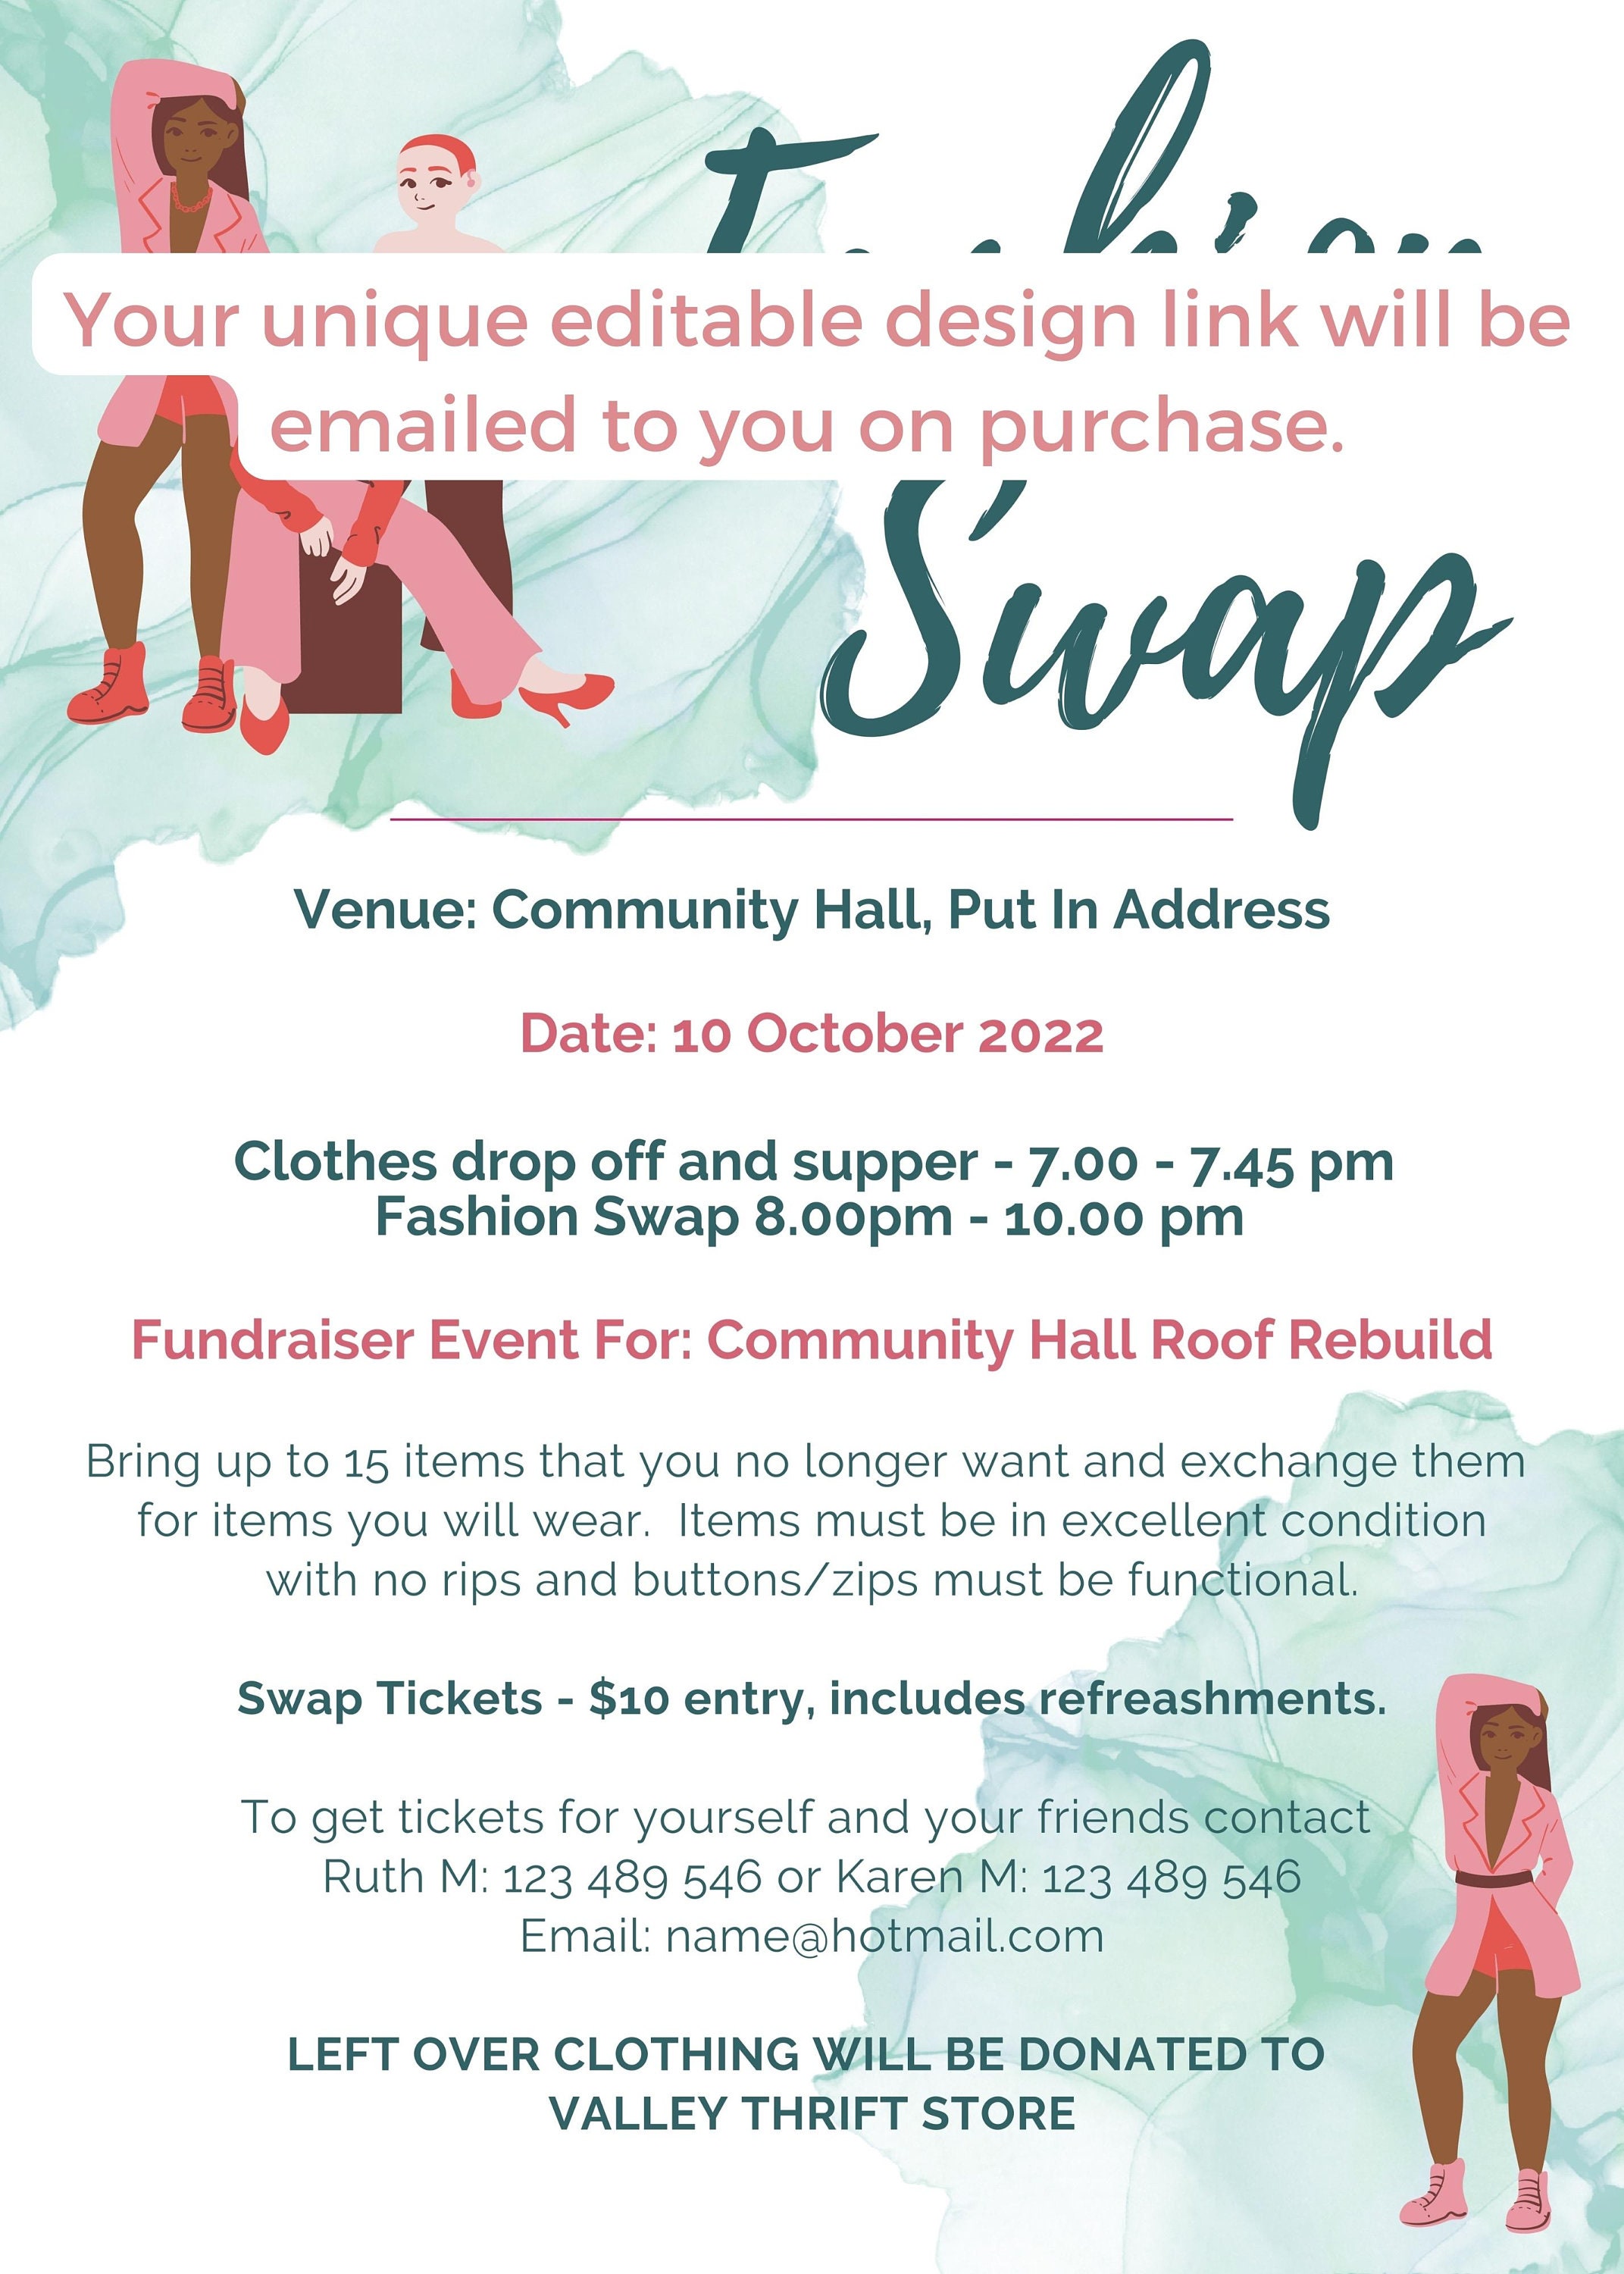 Clothing Swap - Community A5 Flyer/Poster Template